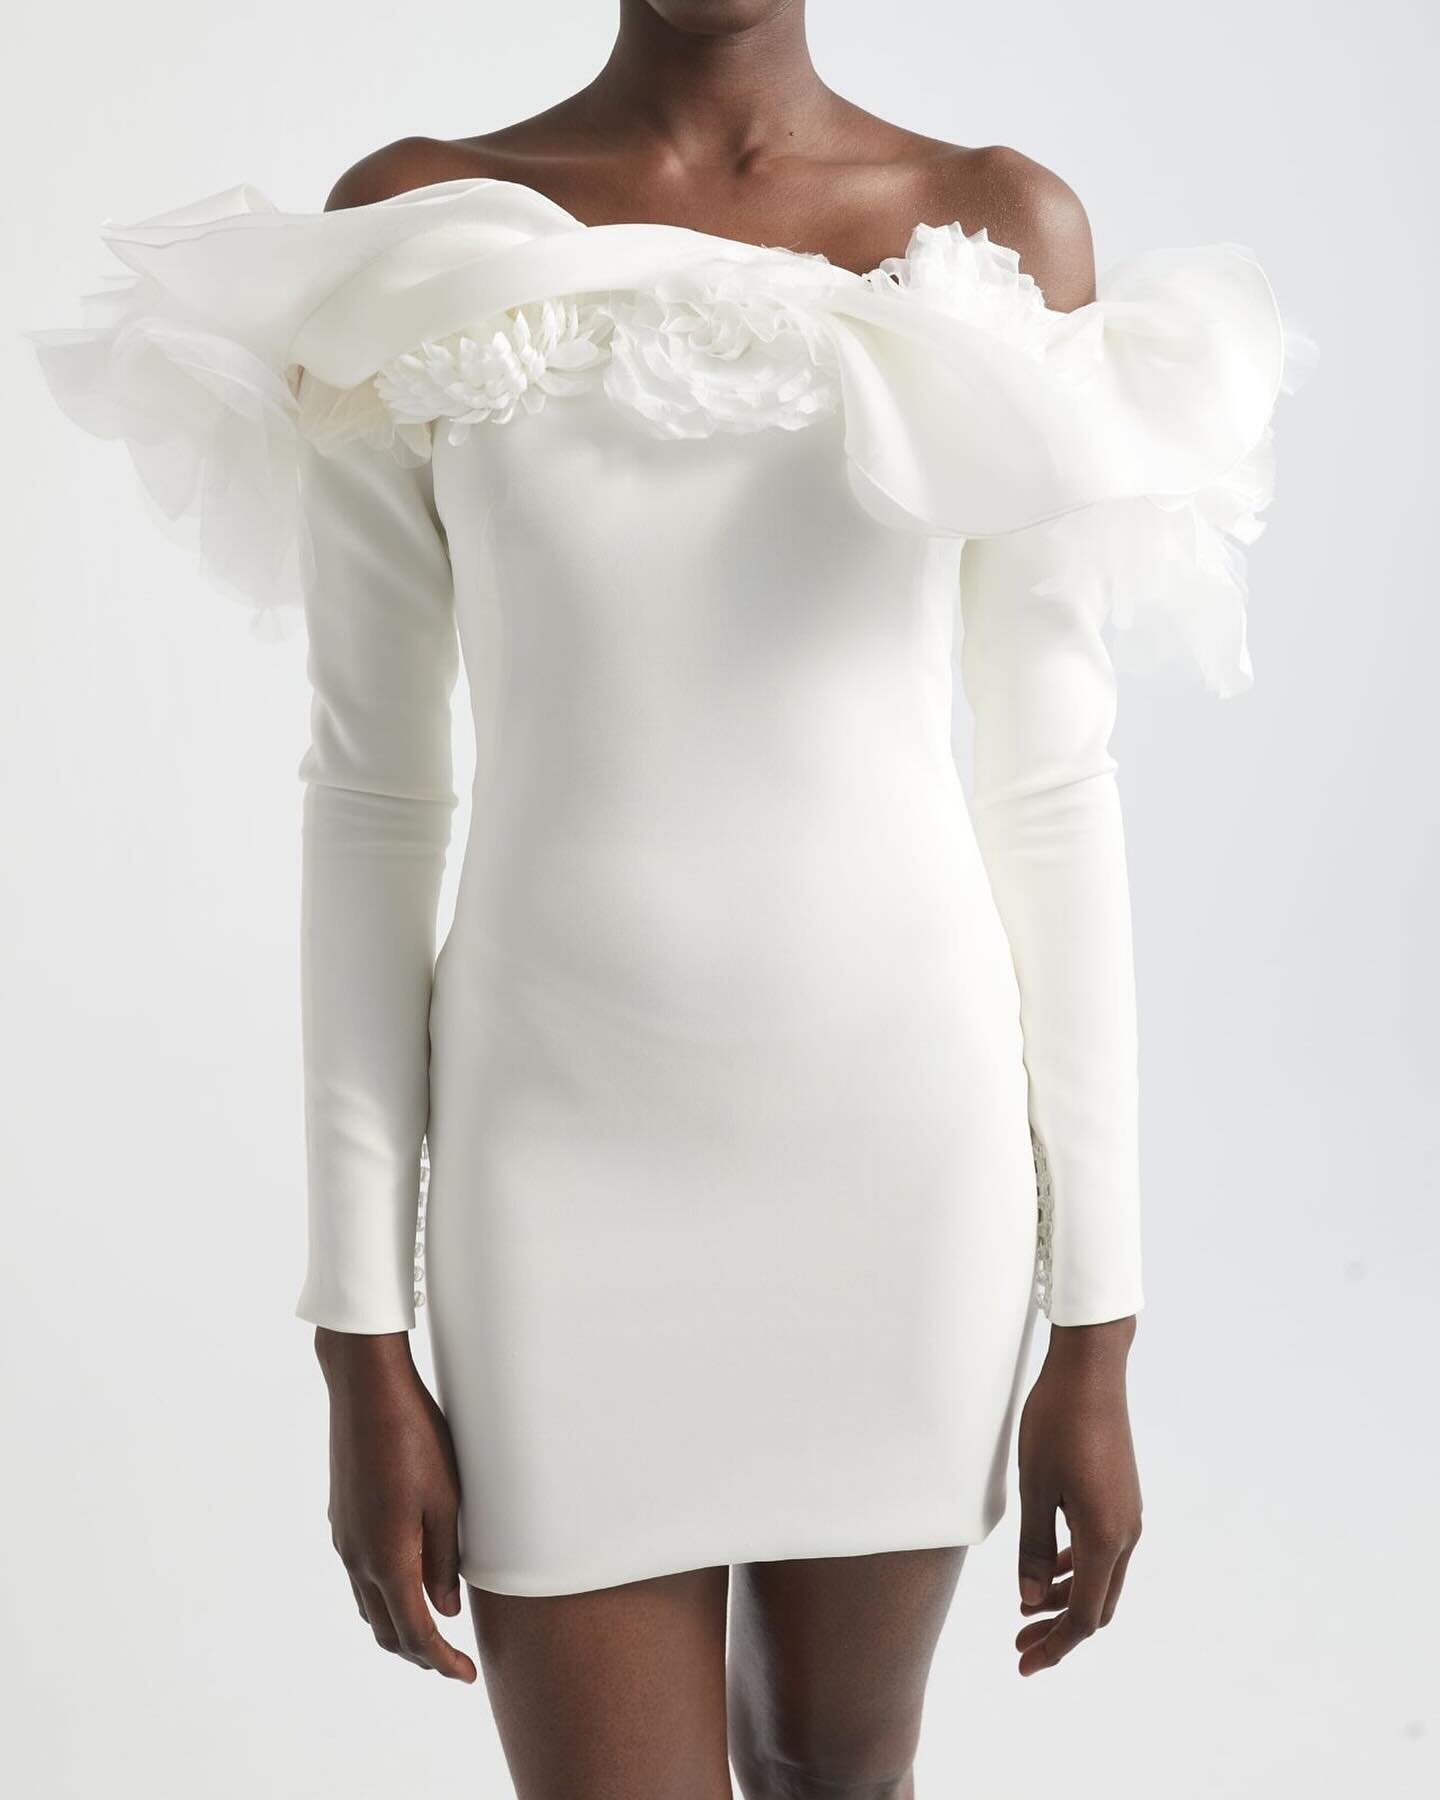 New Find 🤍 Ninfea by Yolancris. Original price $3,220 - find price $1,610. 🤍 a perfect little bridal mini for your after party, rehearsal dinner or engagement party look 🤍